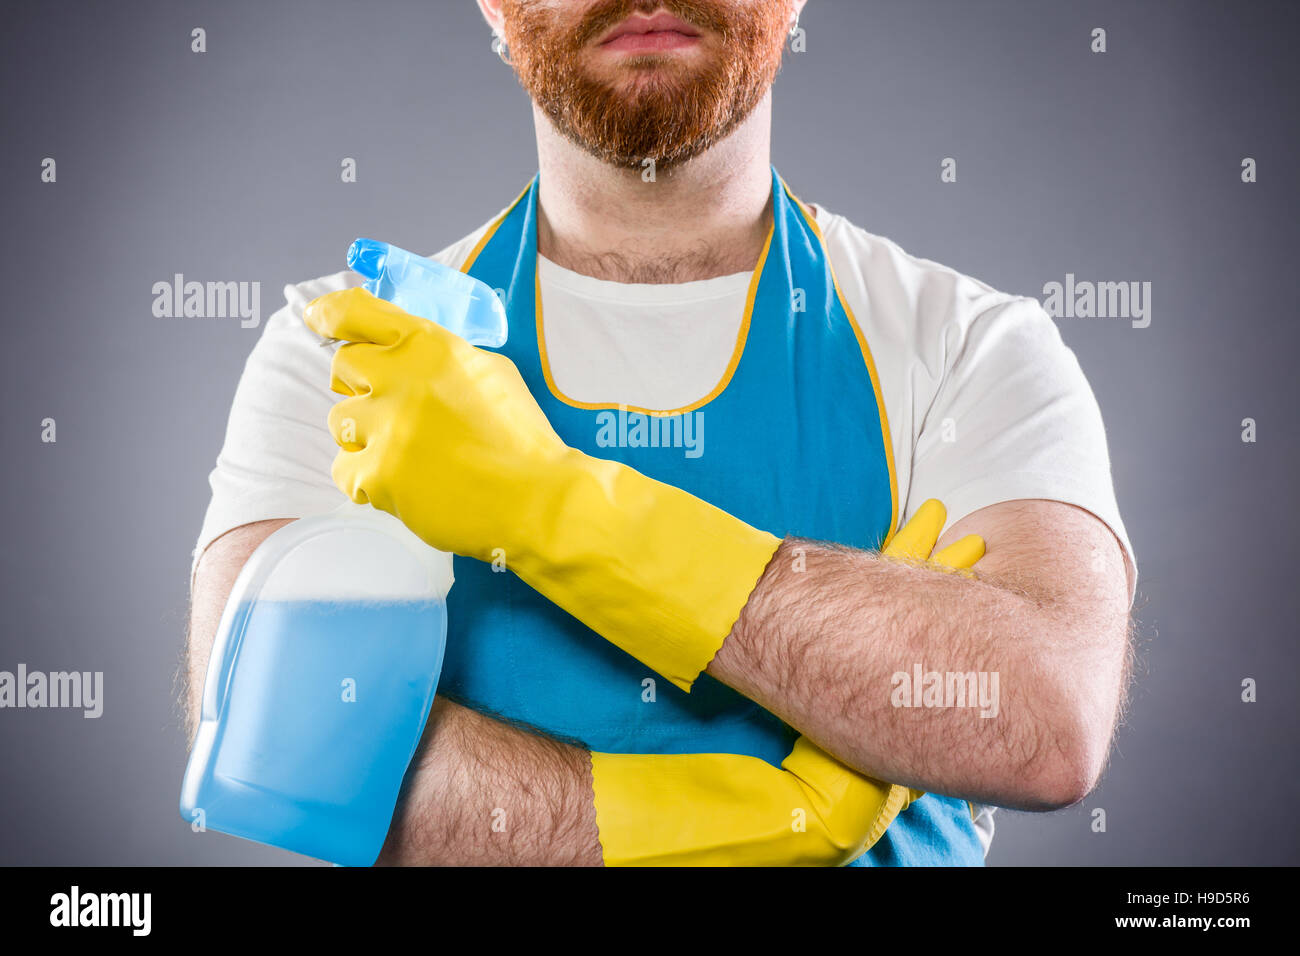 Cleaner Man with Arms Crossed Holding a Detergent Wearing an Apron and Plastic Gloves Stock Photo